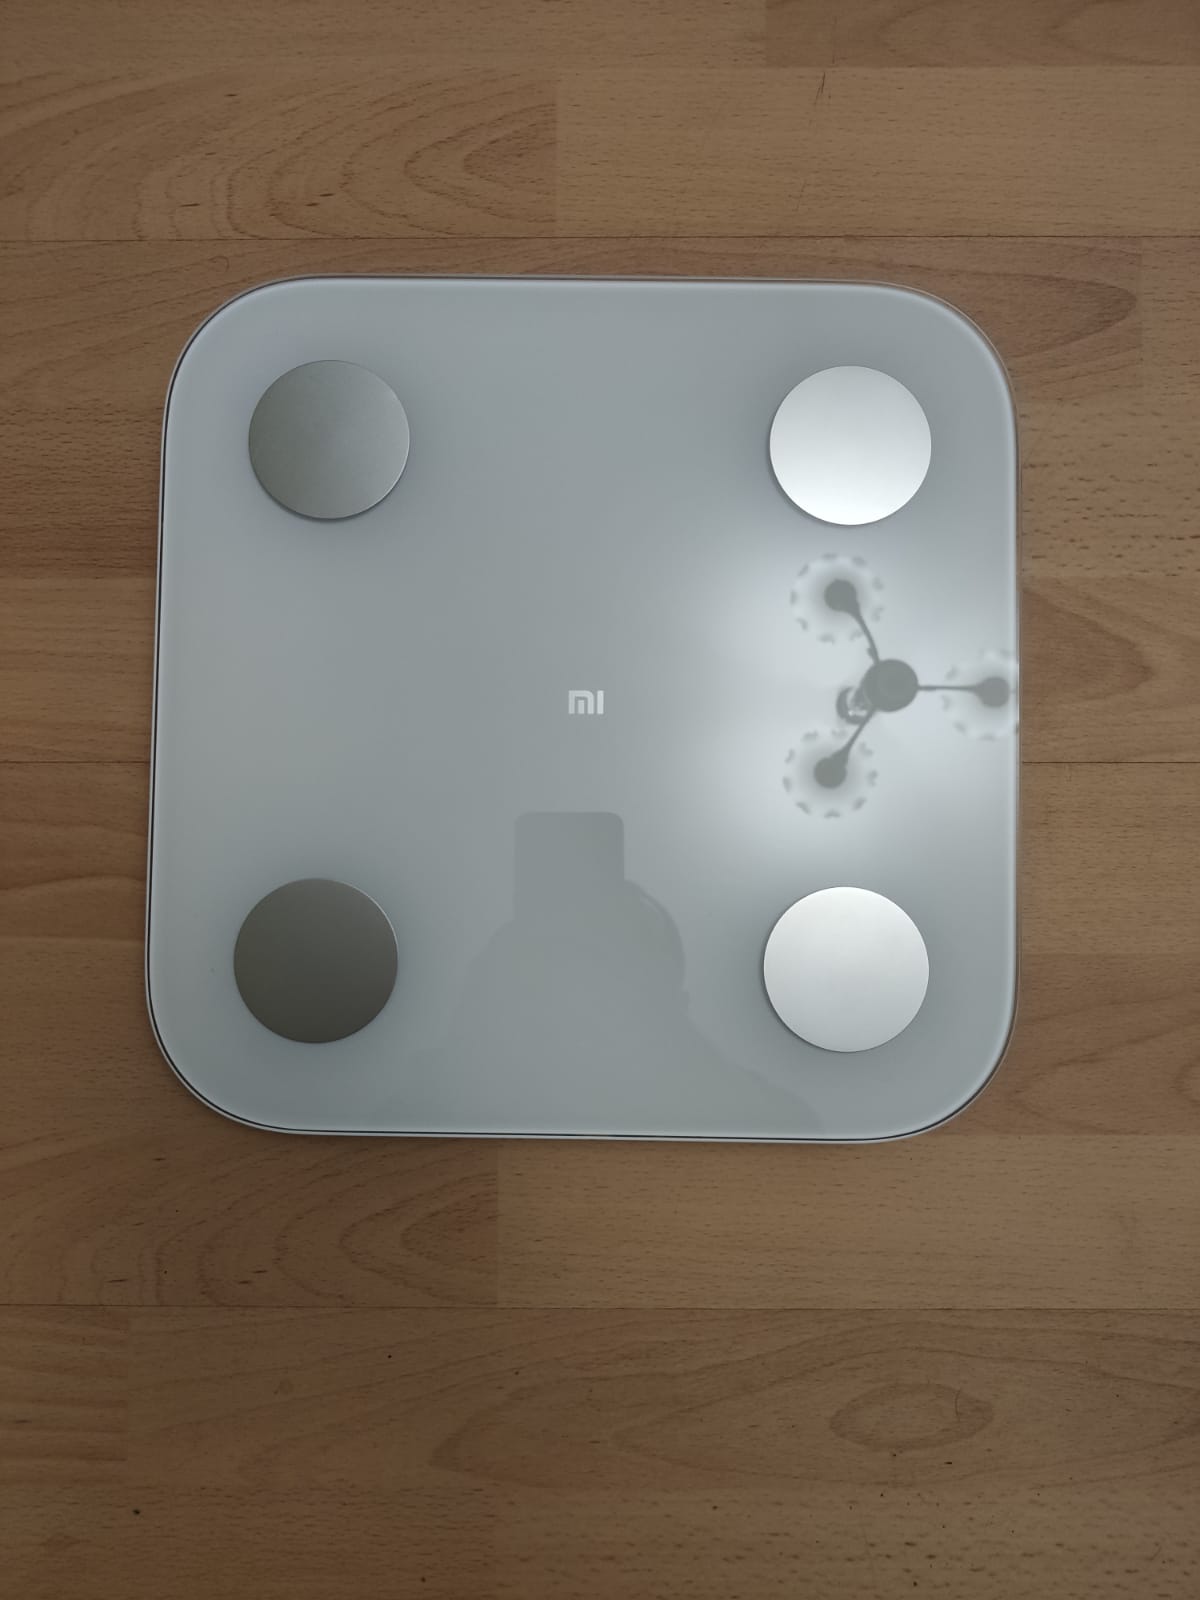 Xiaomi Weighing Scale 2: Pros and Cons 